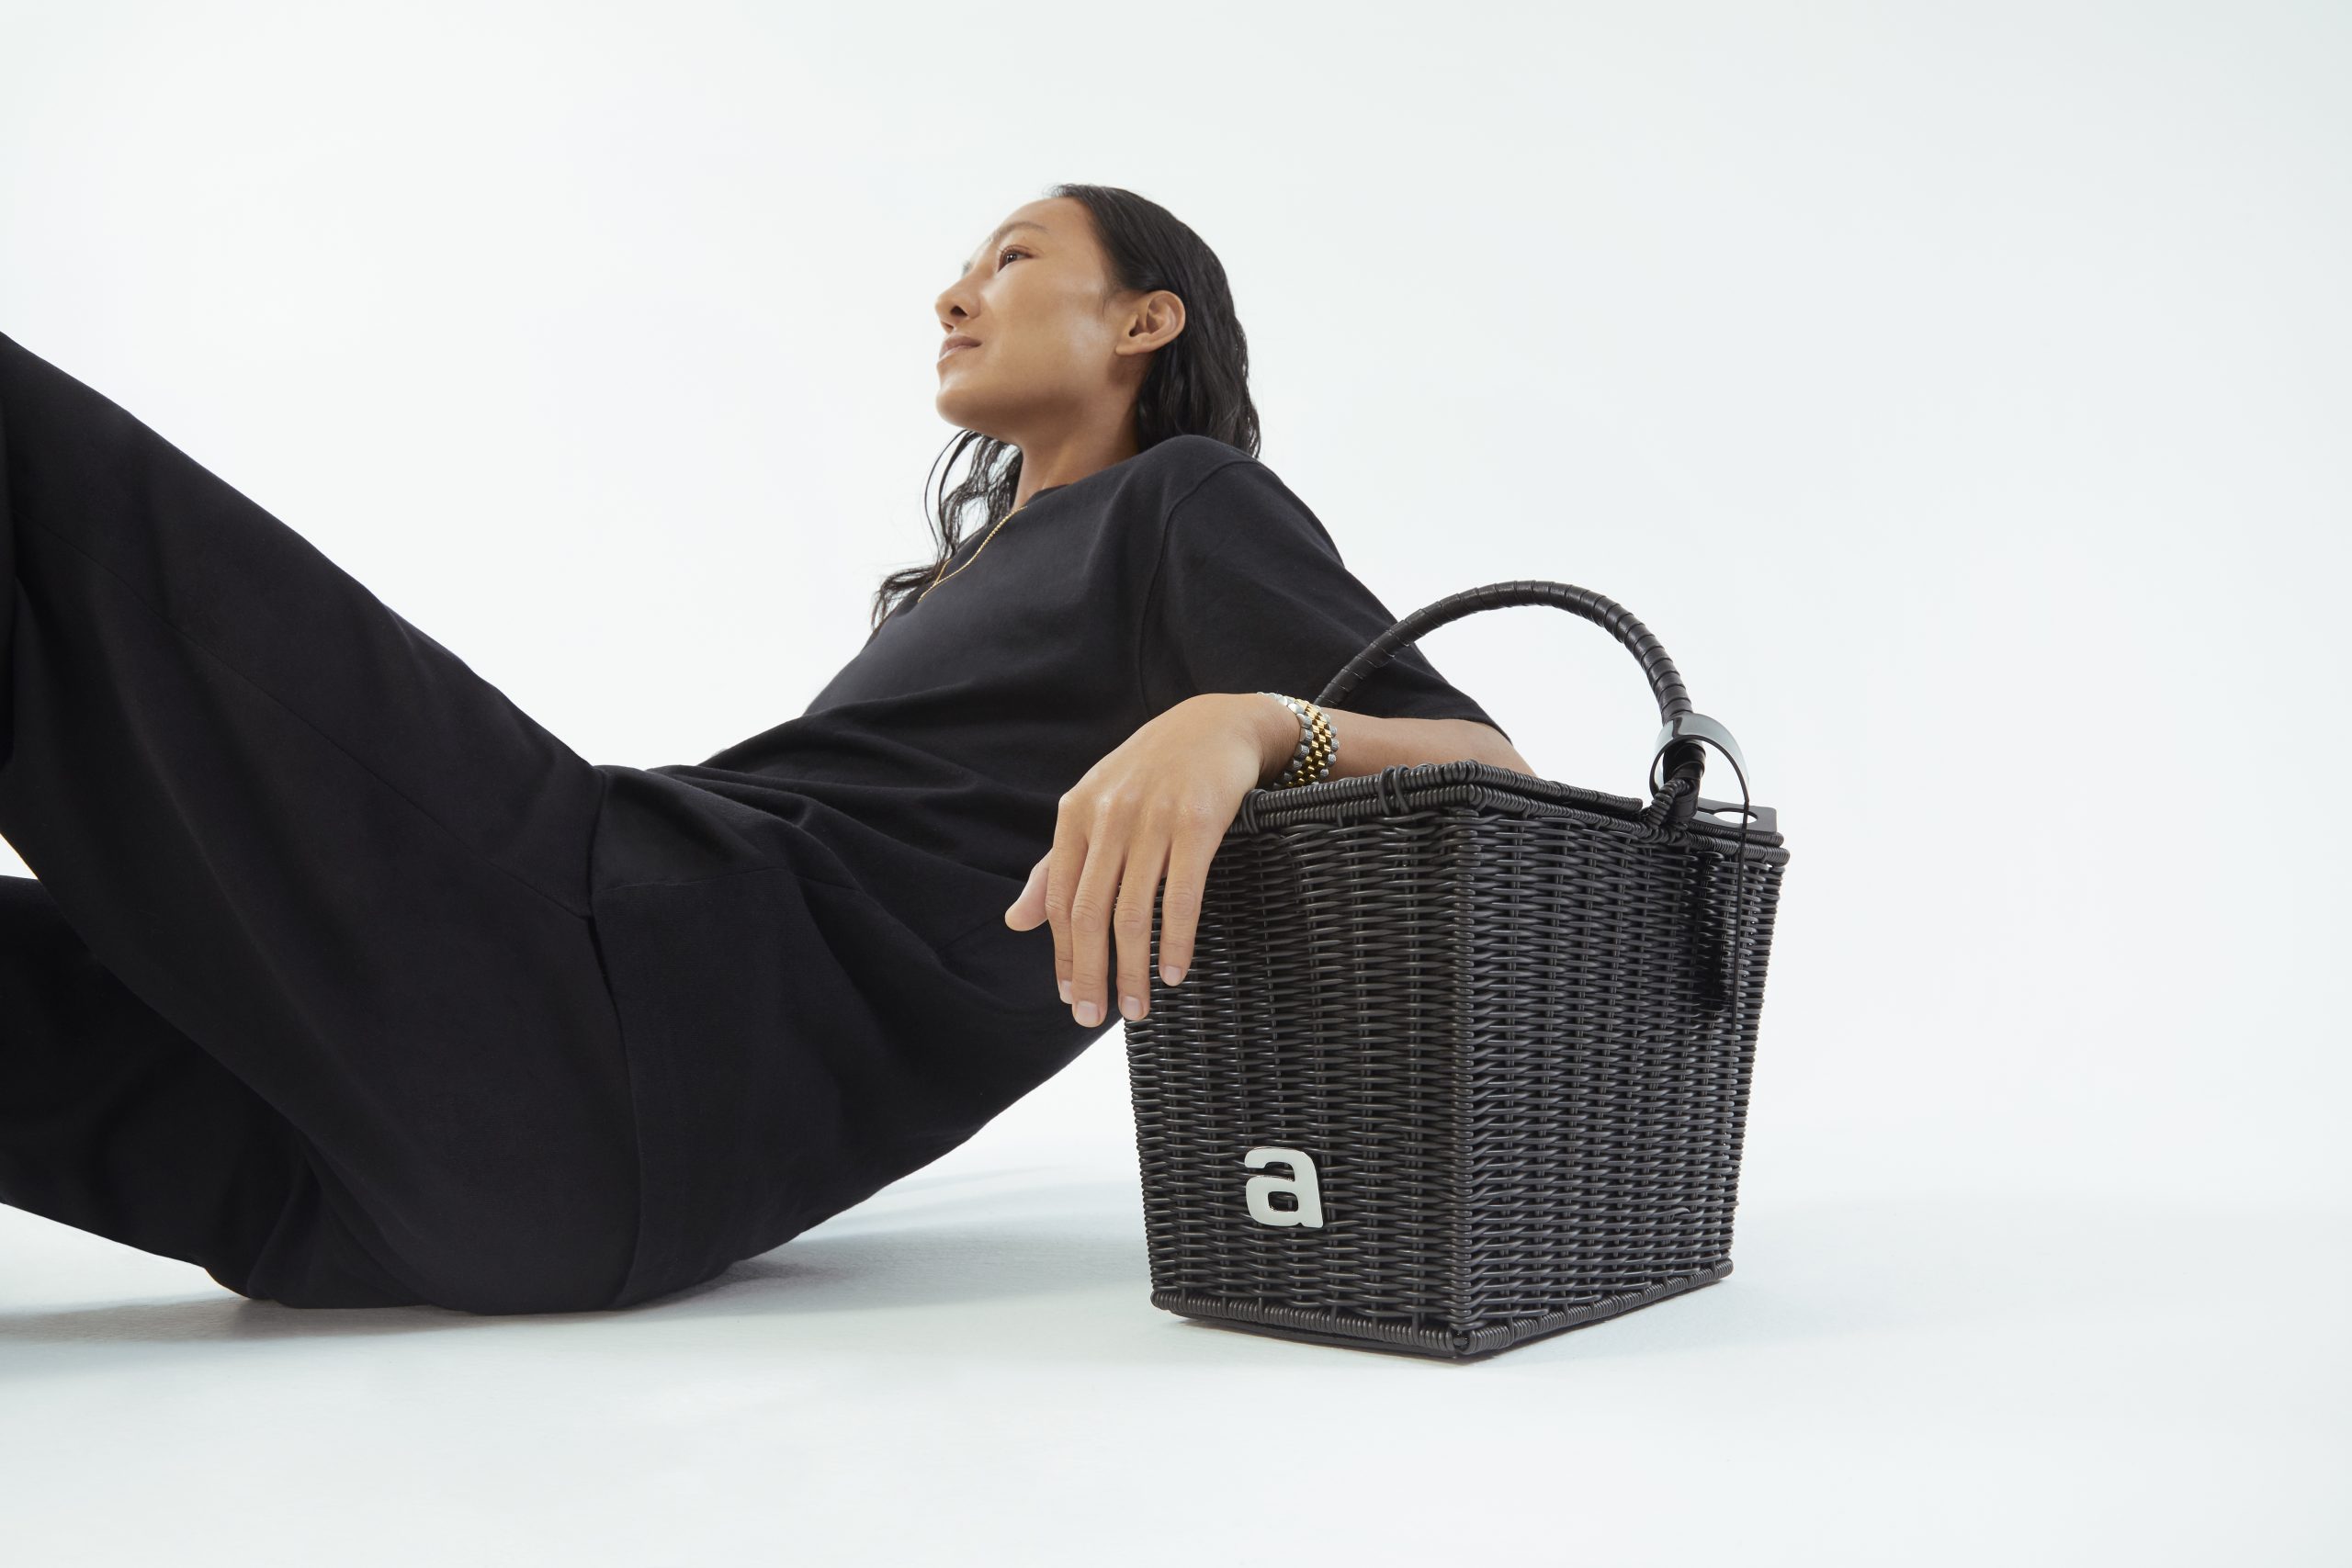 Alexander-Wang-and-the-McDonalds-basket_01062019-scaled